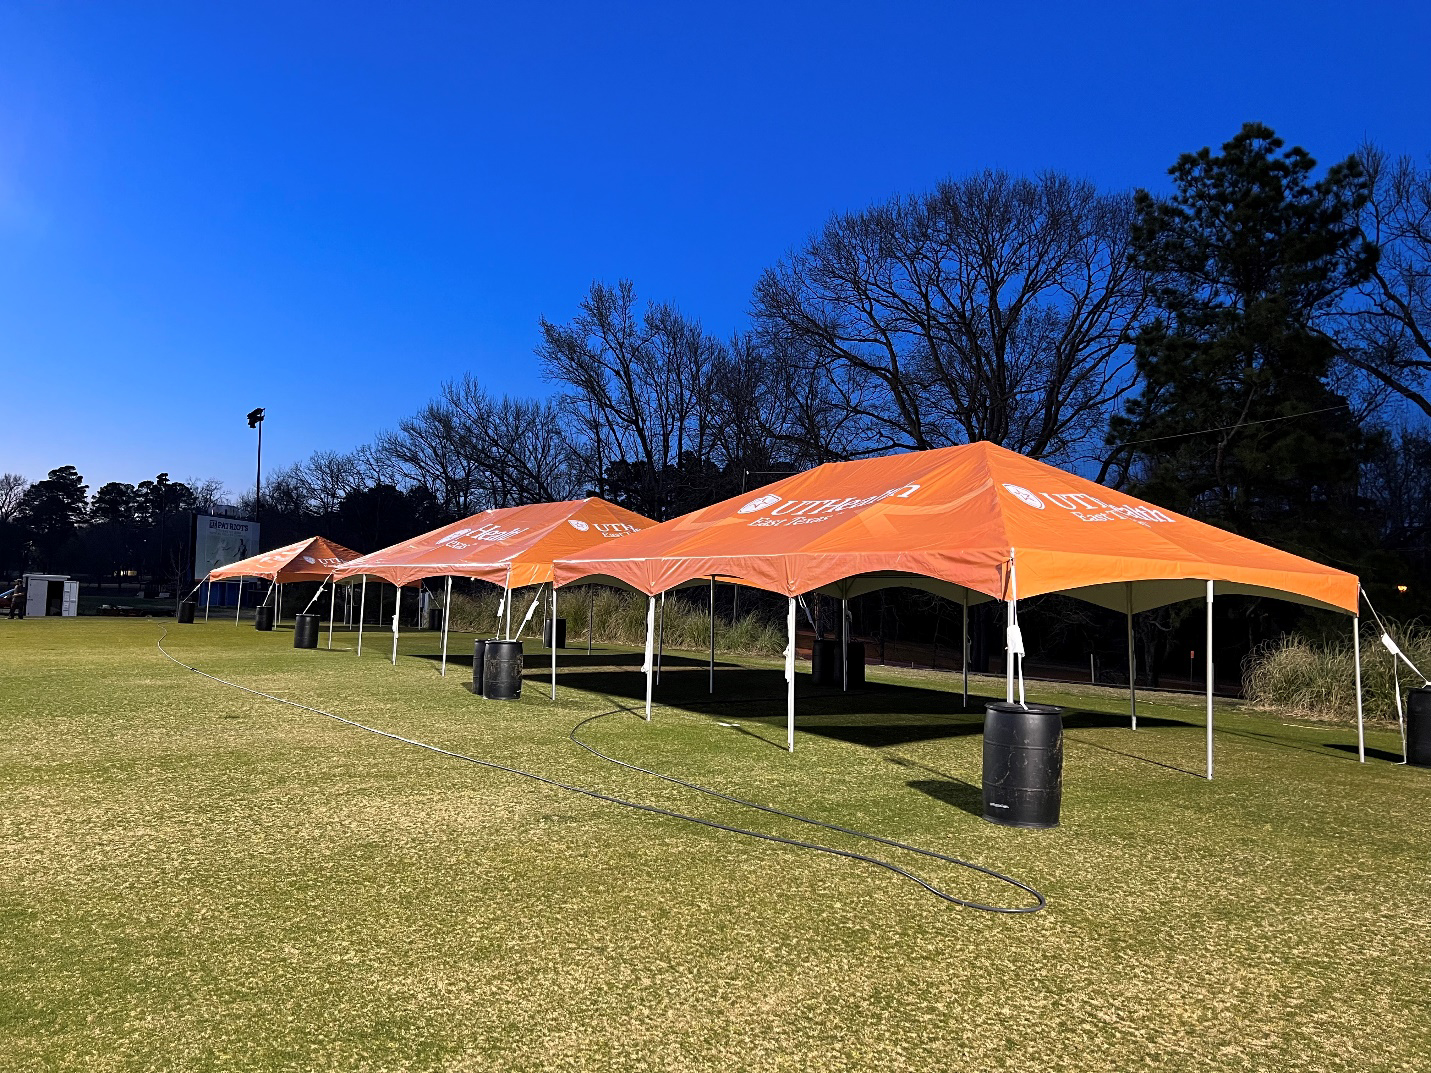 20x20, 20x30, and 20x40 X-Series frame tents built for UT Health East Texas.